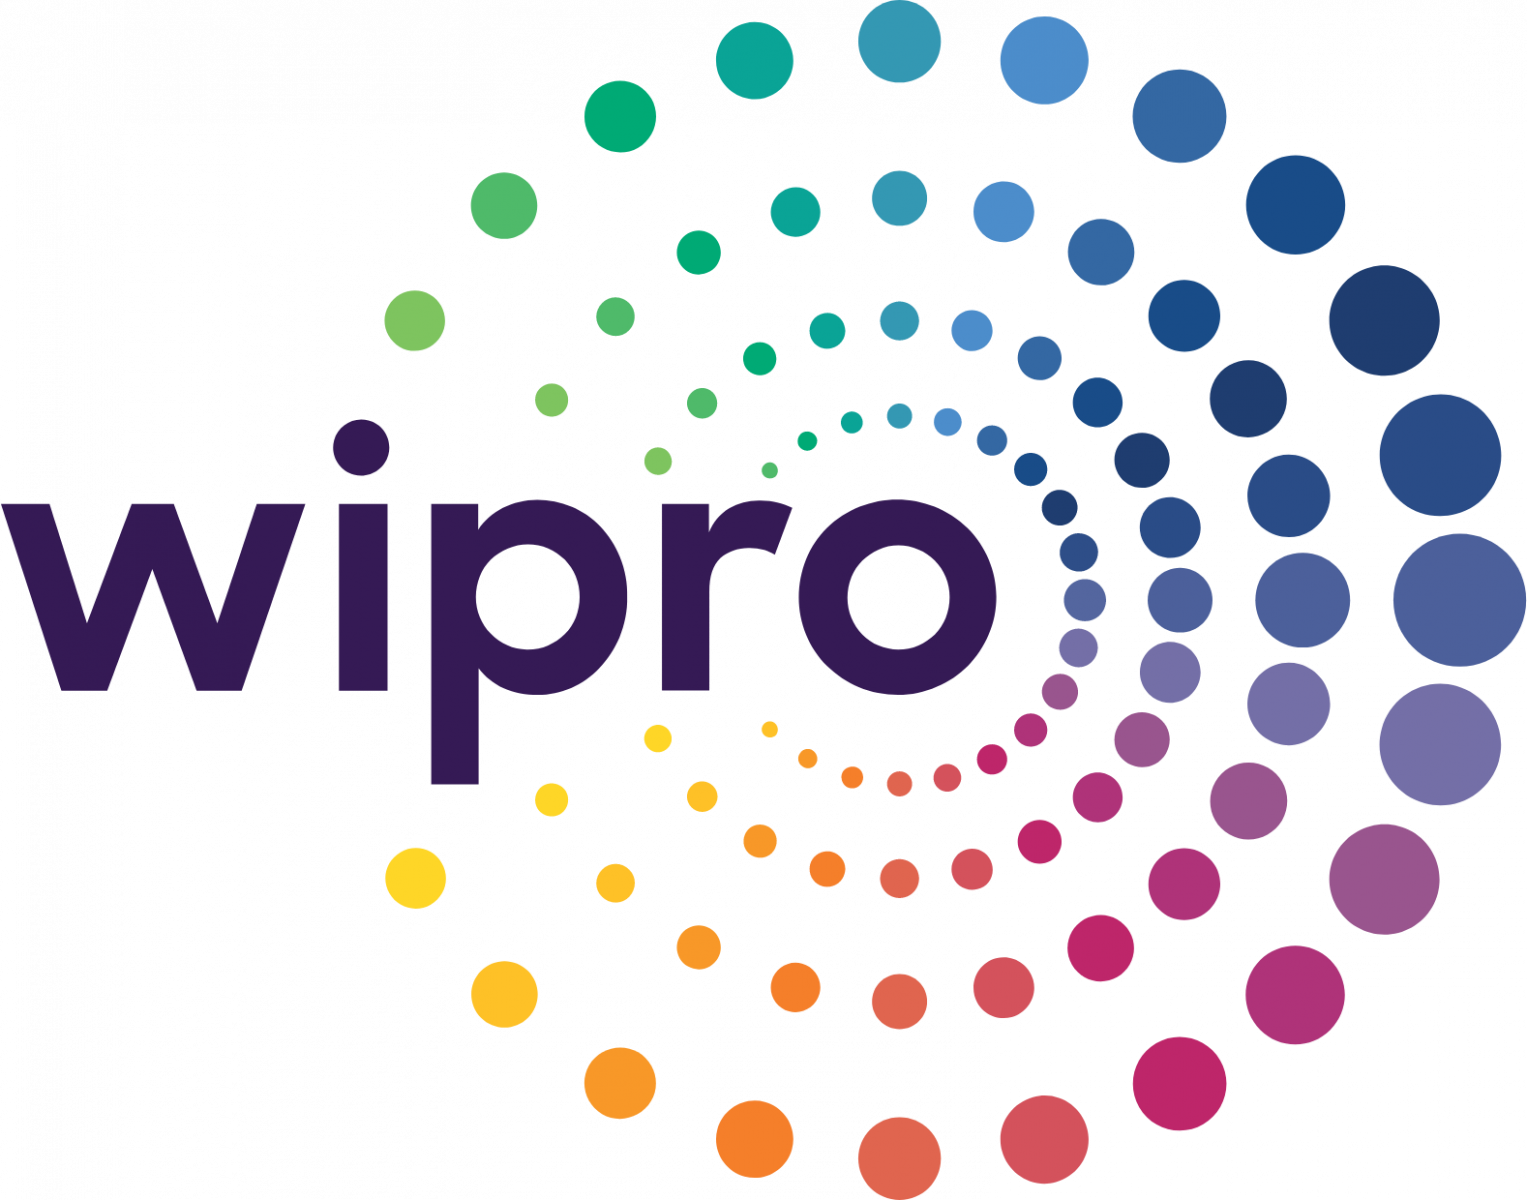 Wipro it companies in Lucknow